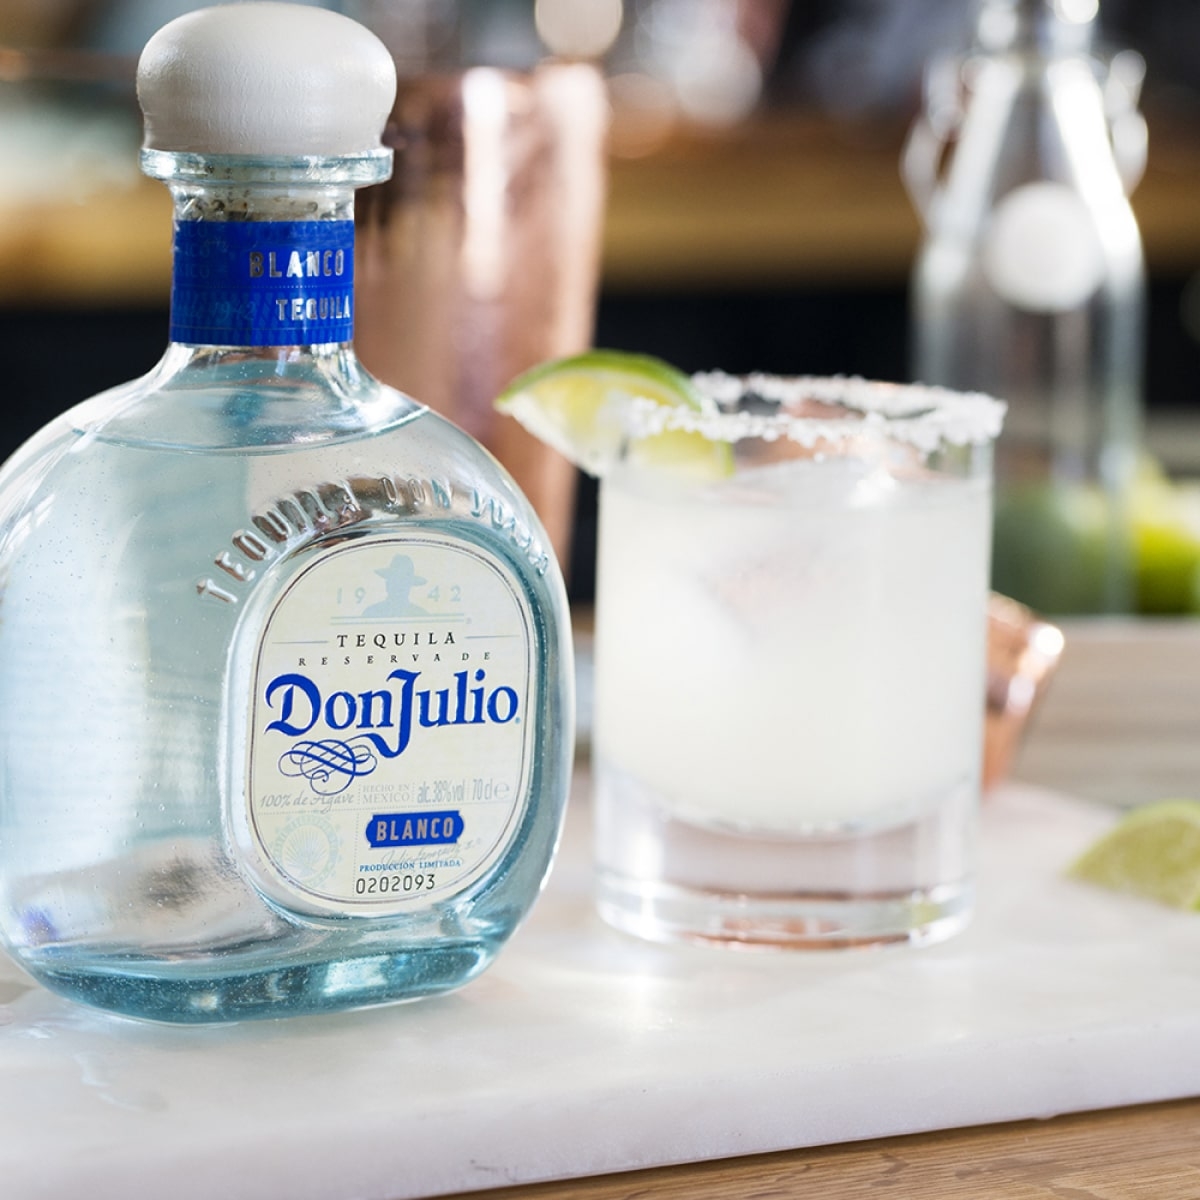 Don Julio bottle and glass